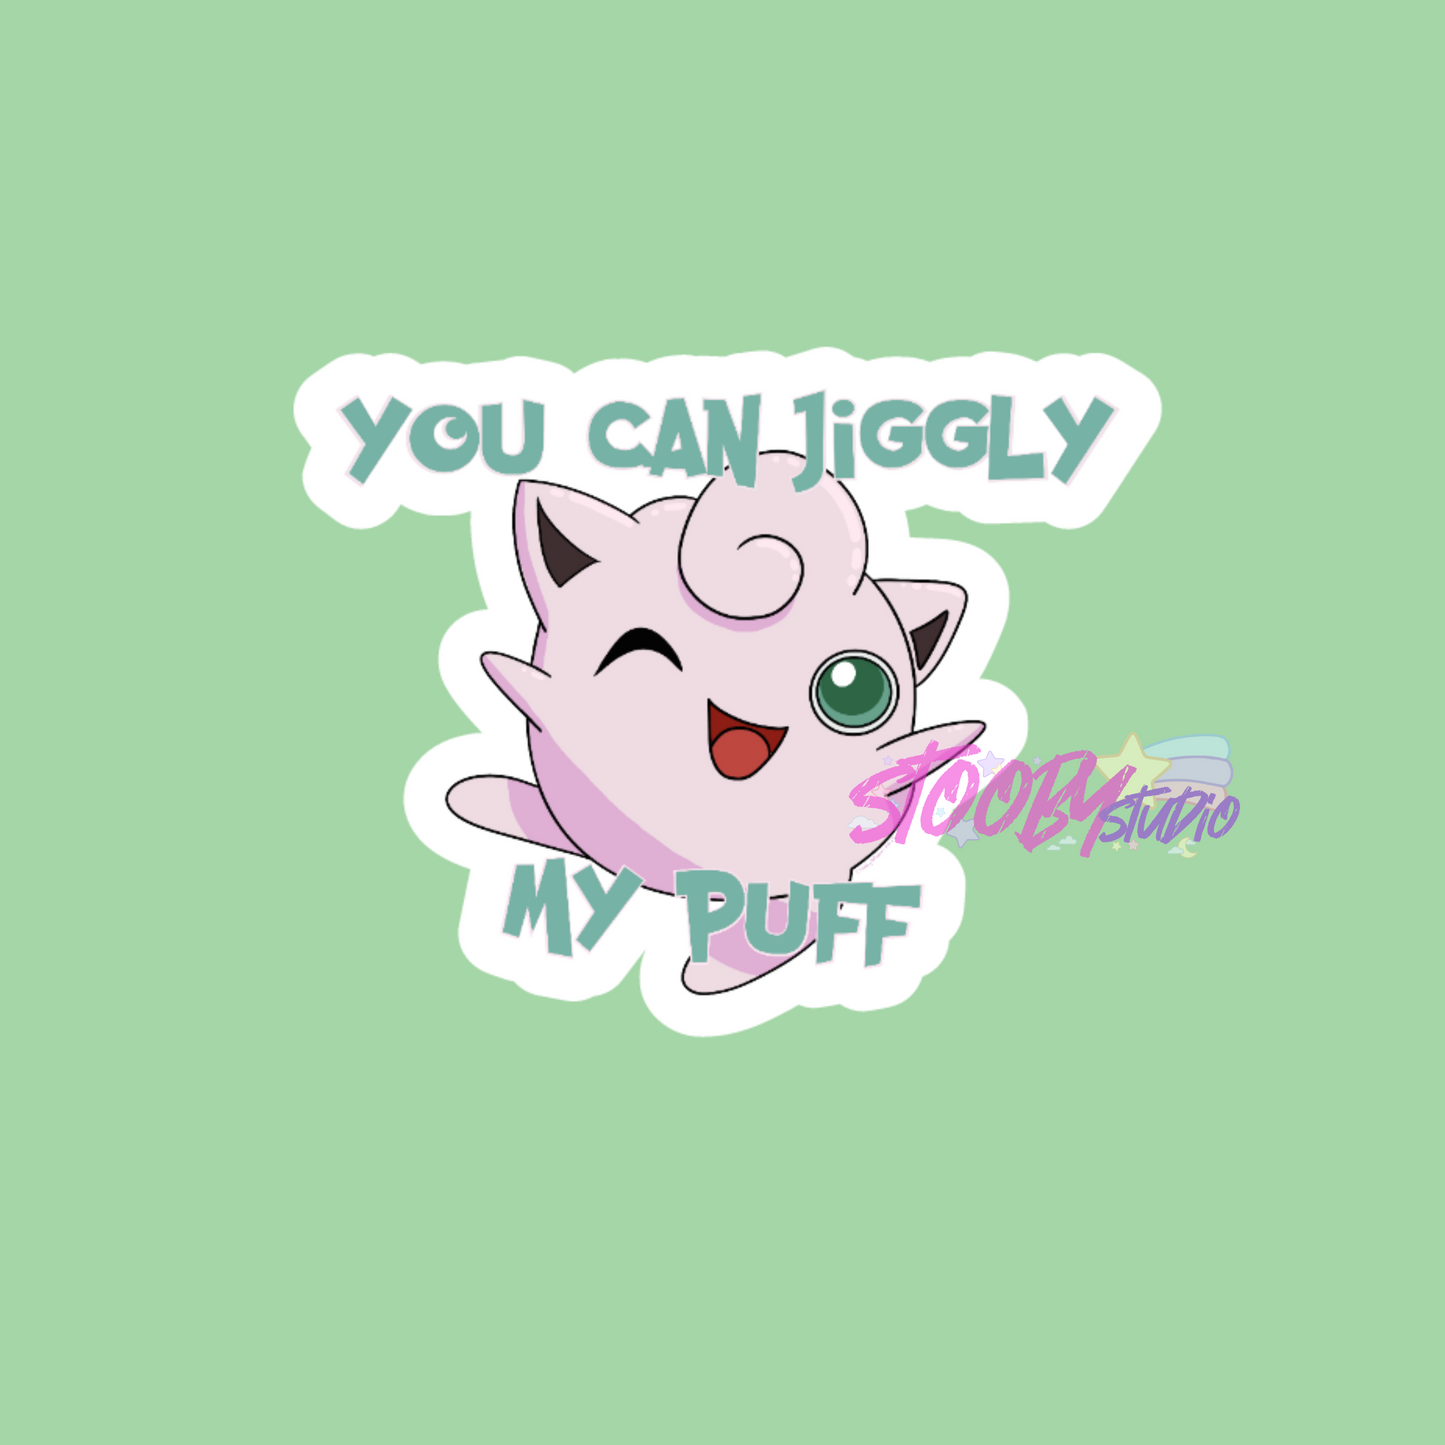 You can jiggly my puff